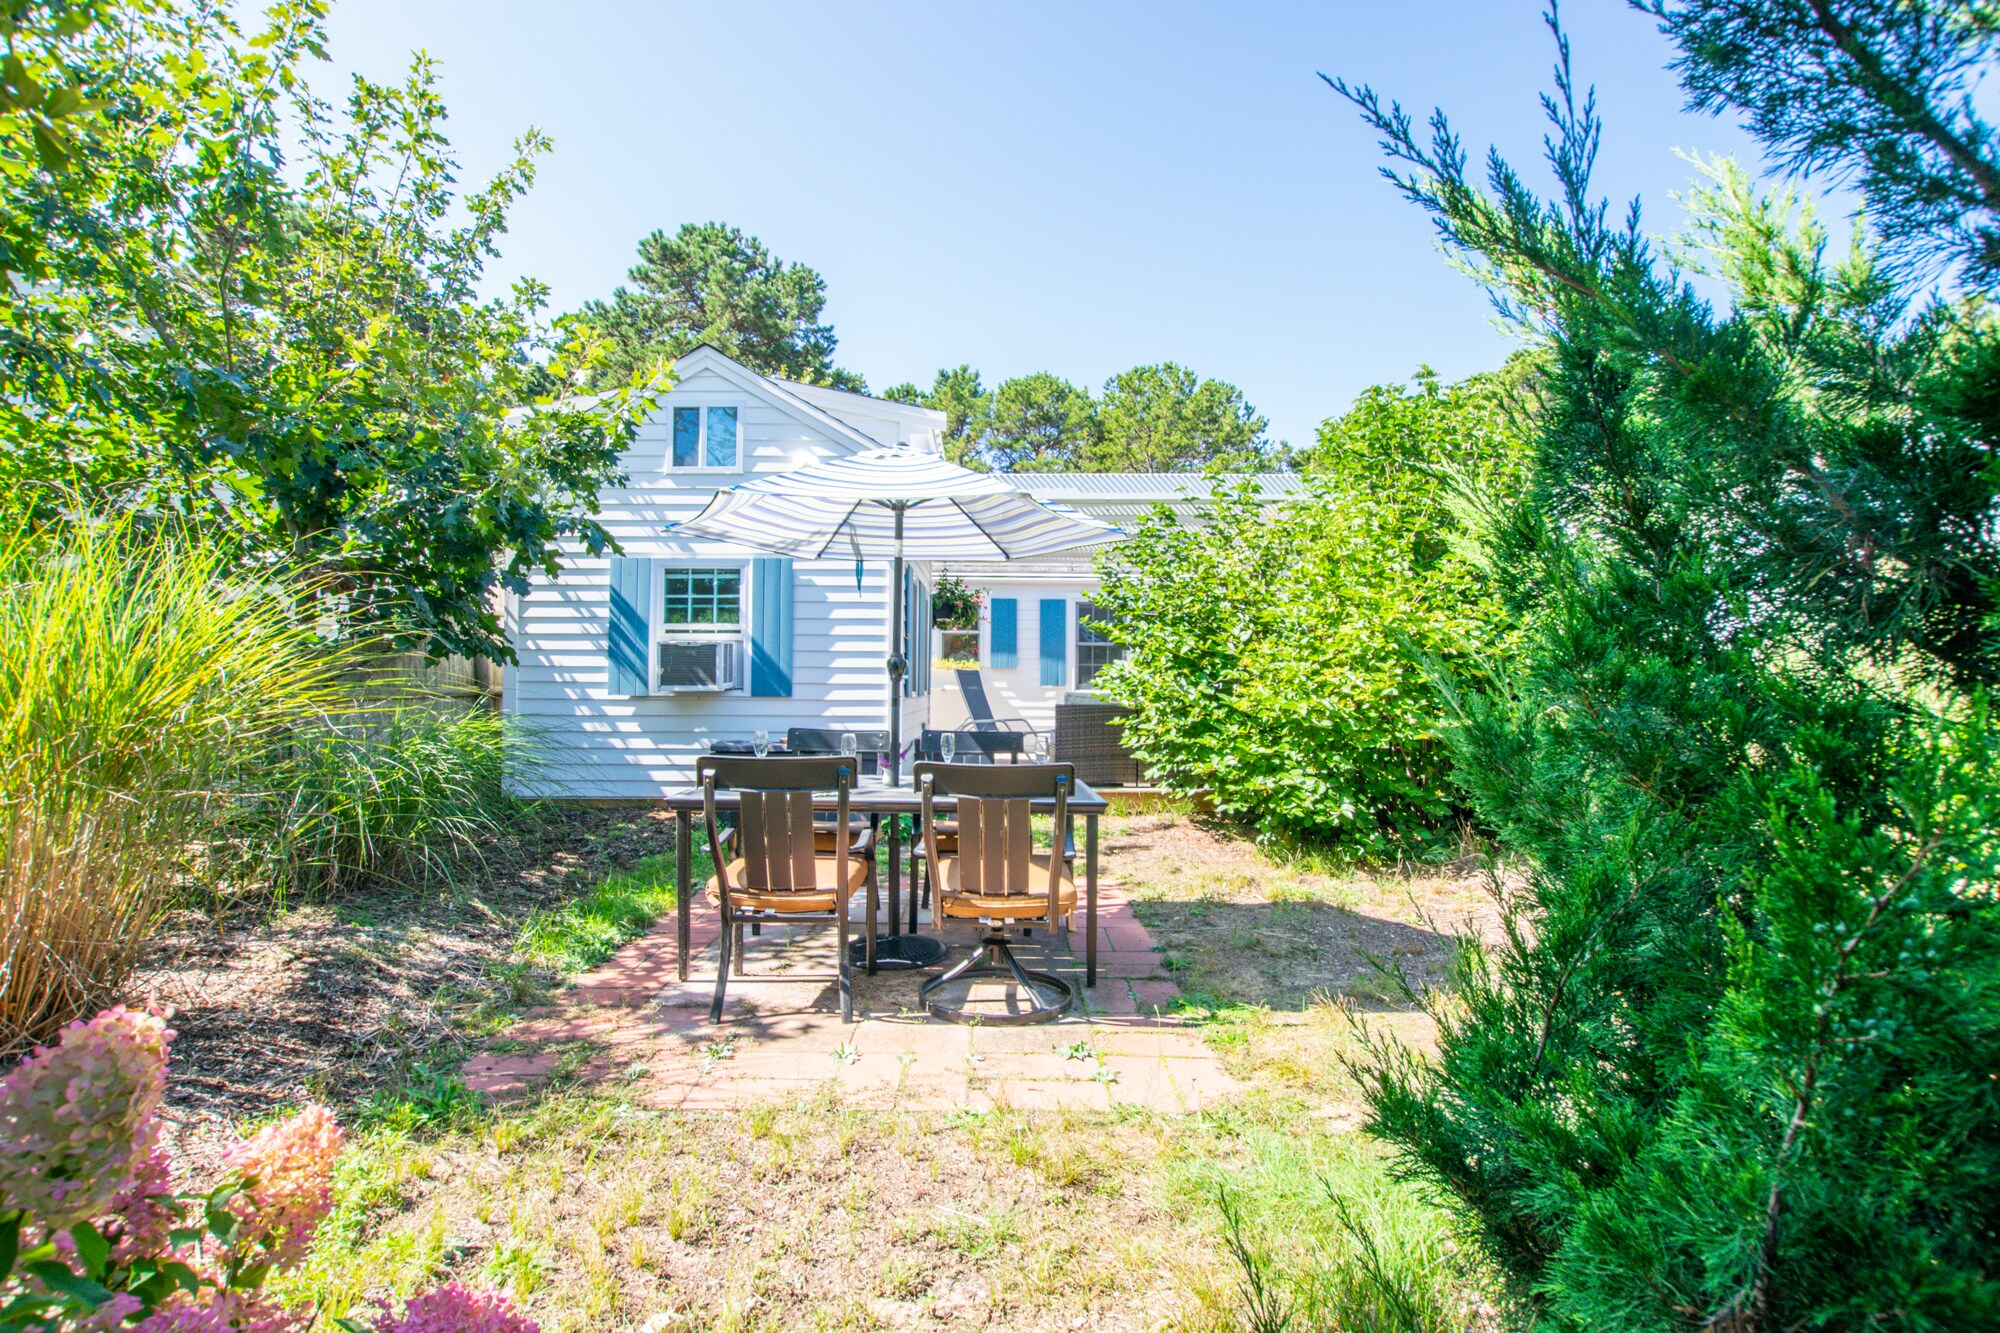 Property Image 2 - 13357: Updated Cottage w/ Detached Studio, Fully Fenced Yard, Deck, Patio & Large Outdoor Shower!